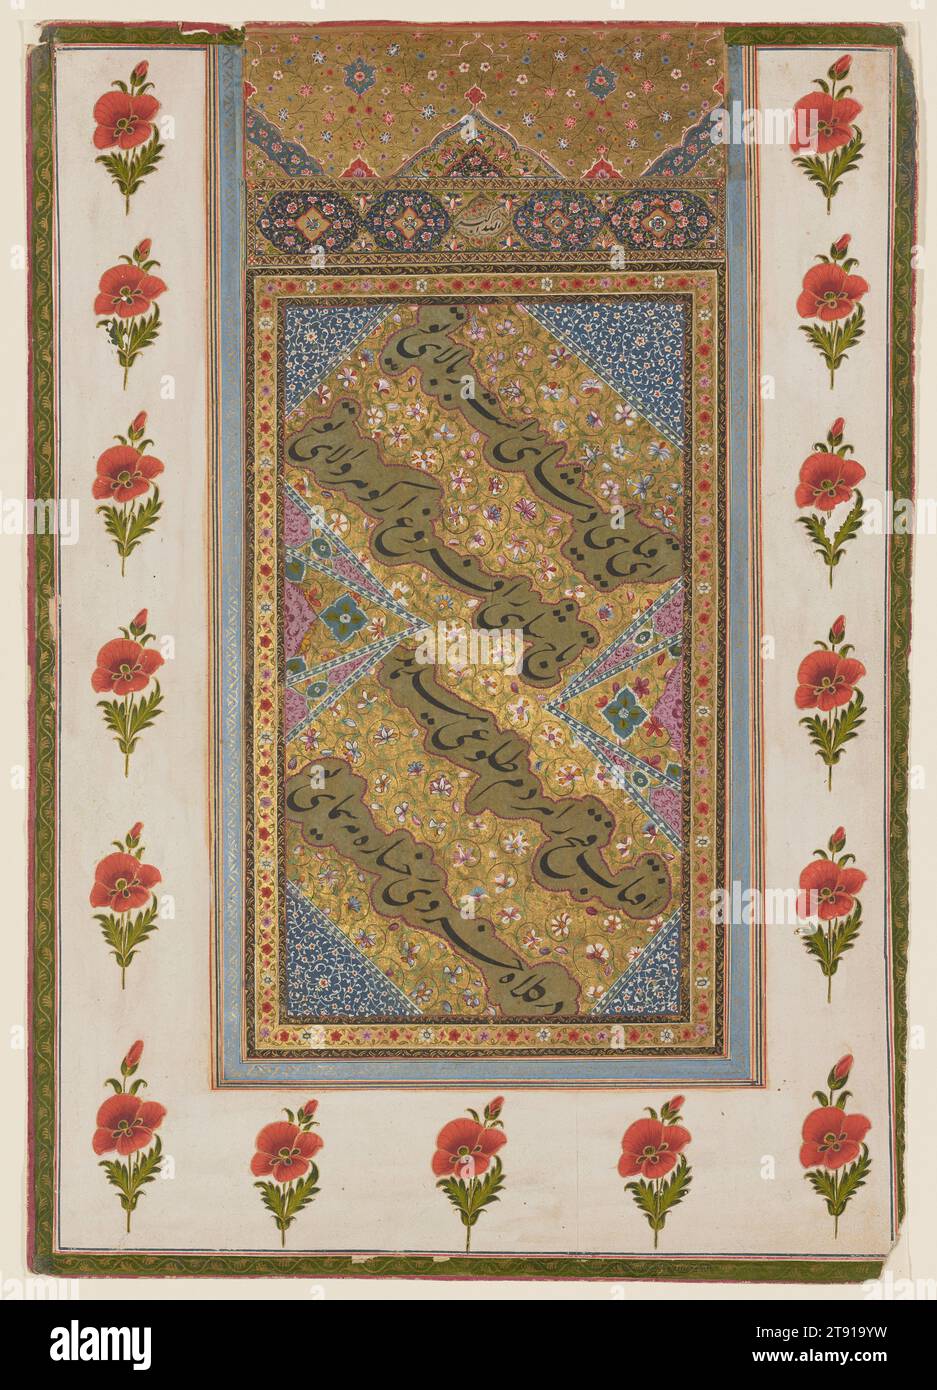 Album folio of poetry, c. 1725, 16 x 11 1/4 in. (40.64 x 28.58 cm), Opaque watercolor and gold on paper, India, 18th century, Album pages combining fine calligraphy with borders richly illuminated with floral and animal motifs were a favorite Mughal art form as early as Jahangir (1569-1627). During this time, the precious albums assembled from various sources (muraqqa), became popular at court and somewhat supplanted the illustrated book. The taste and expertise of its compiler, rather than the talent of a single artist, determined the range of theme, artistic quality, and coherency Stock Photo